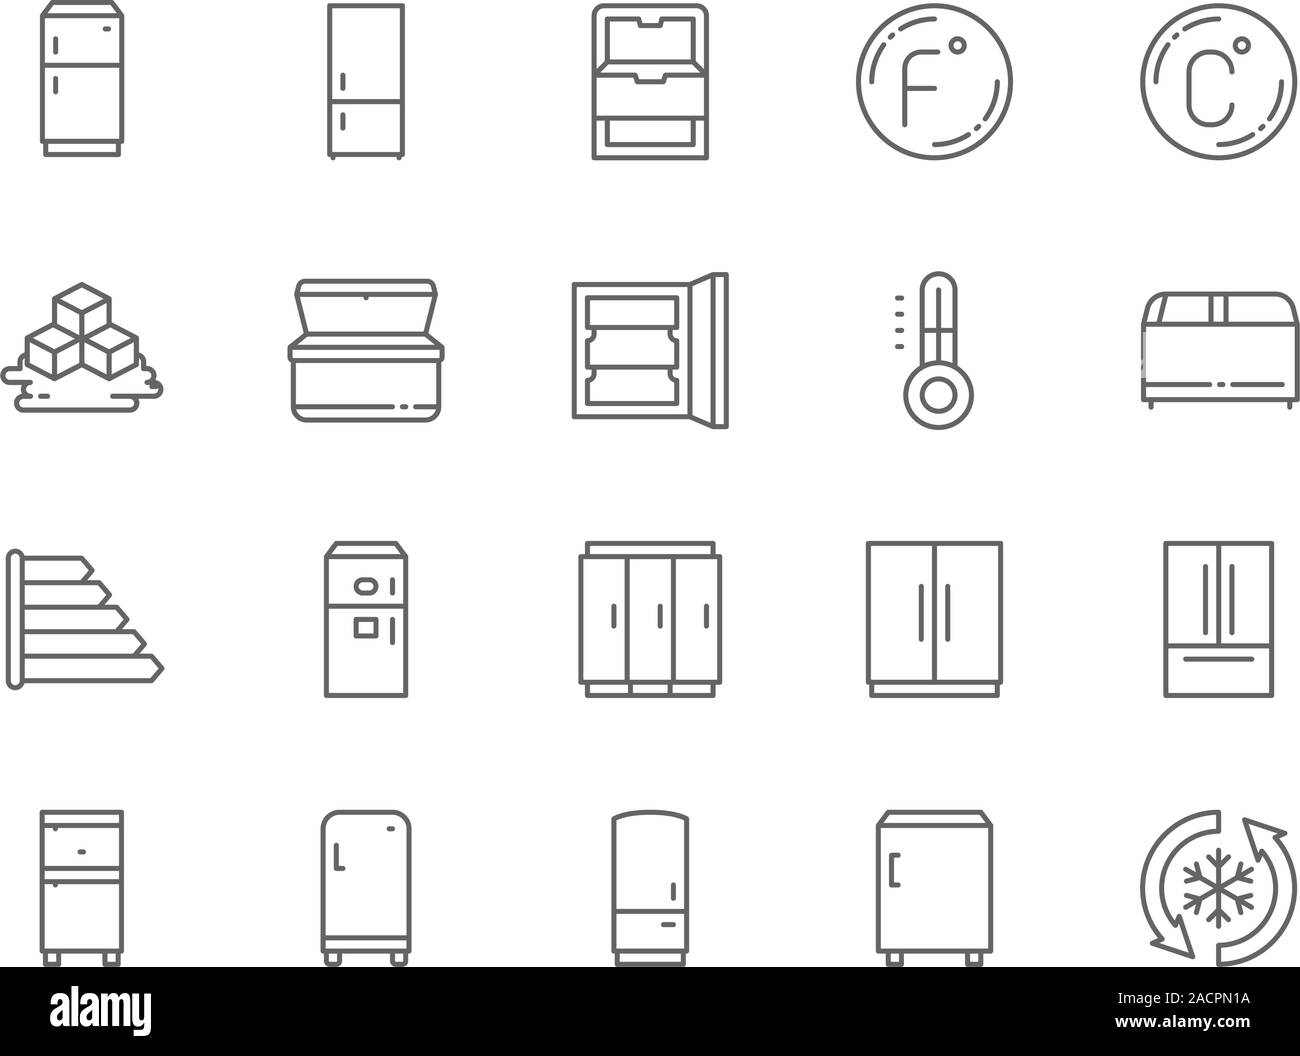 Set of Fridge Line Icons. Thermometer, Freezer, Refrigerator, Ice Cubes and more Stock Vector